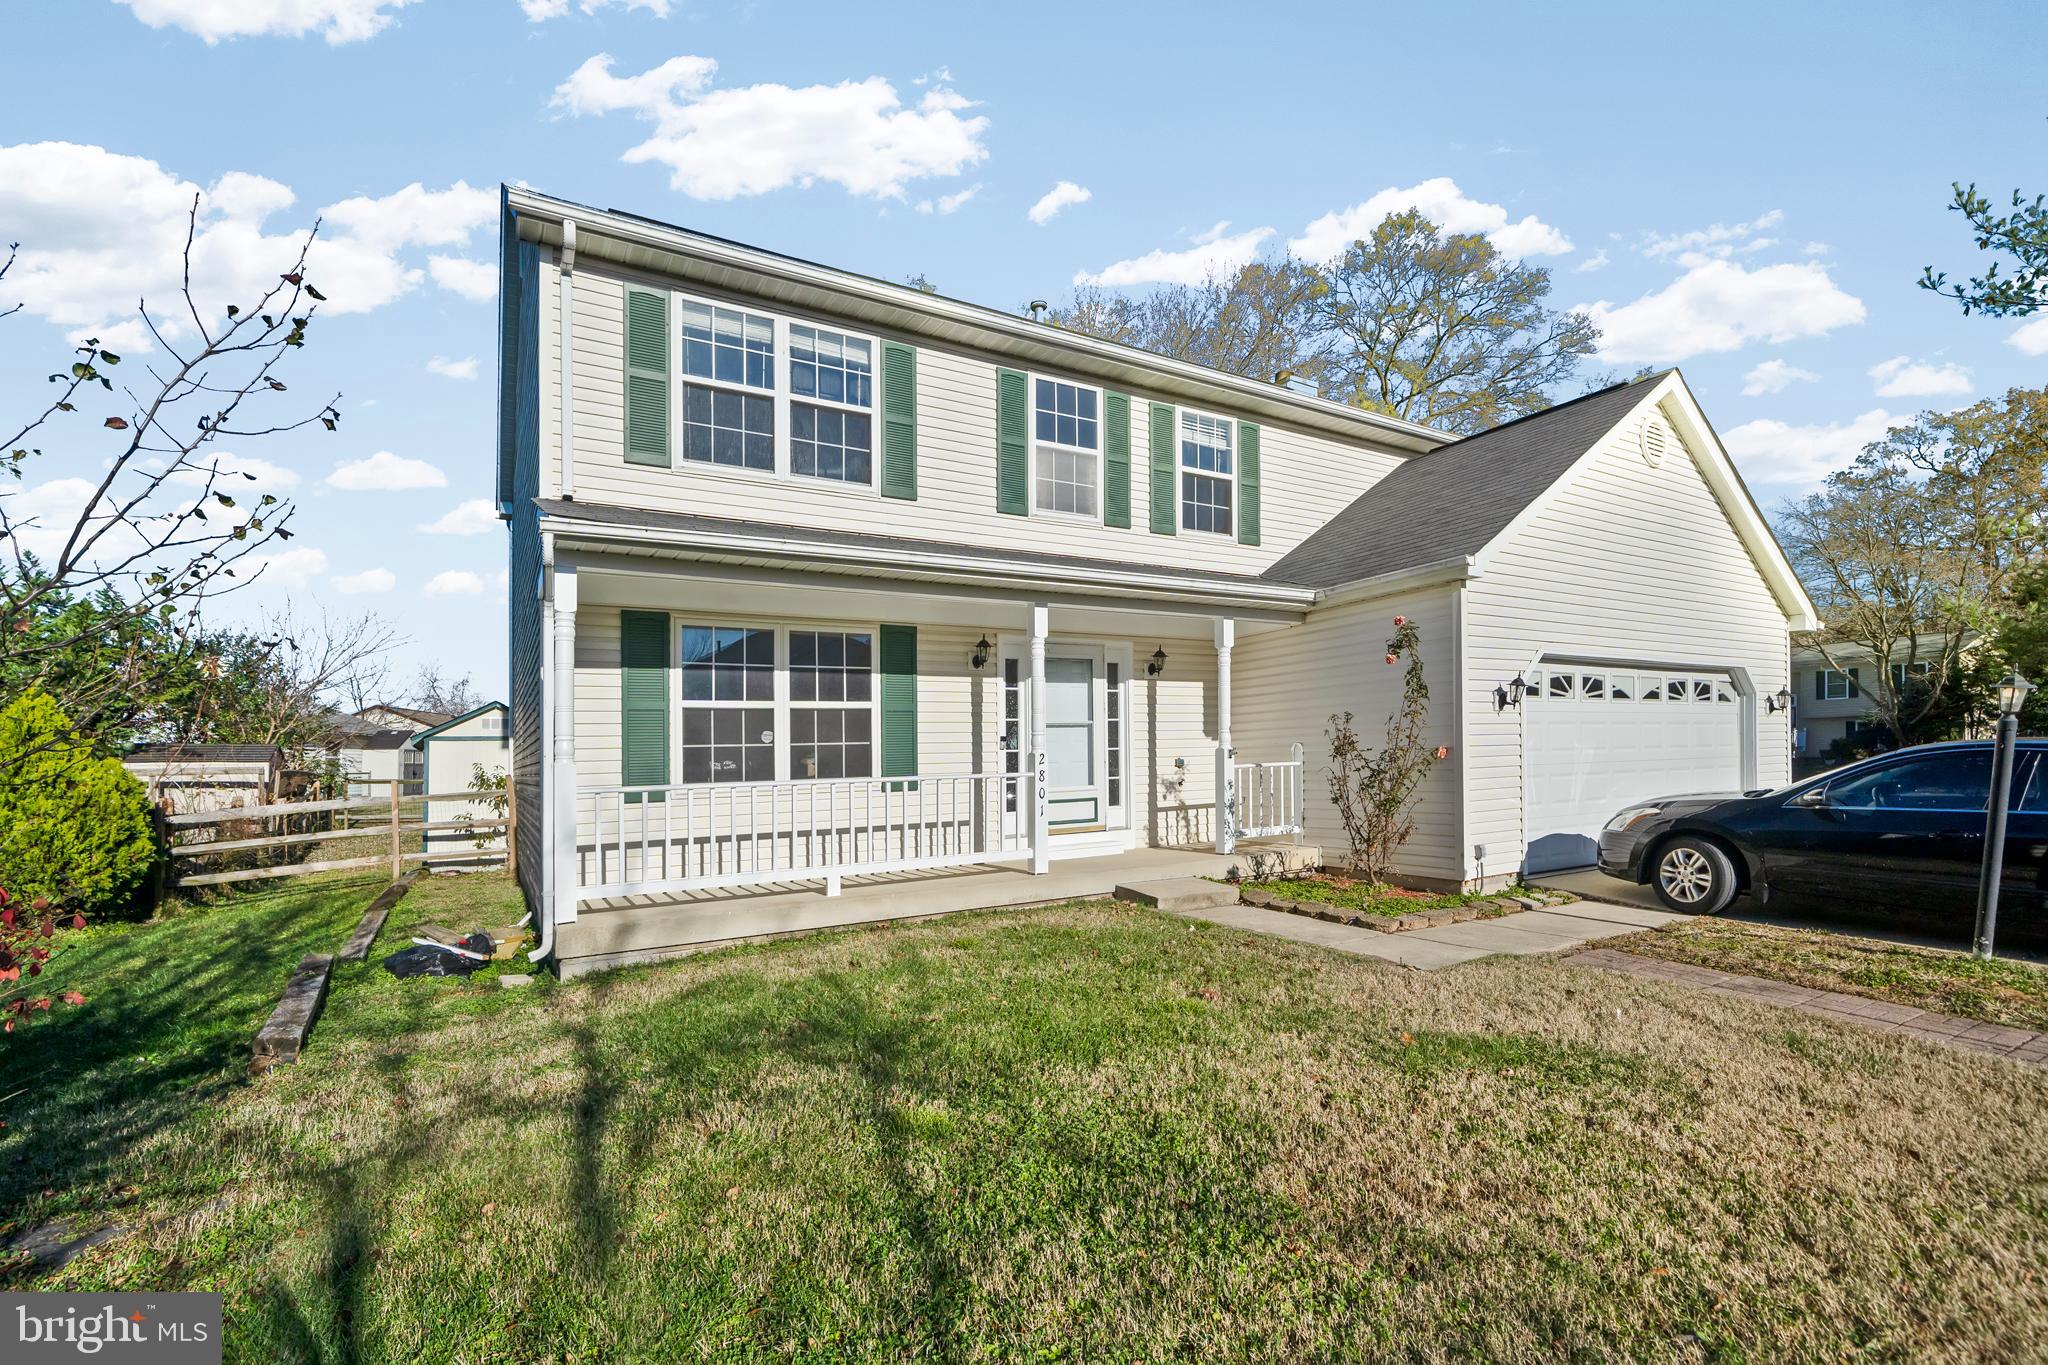 Welcome Home!! No need to look any further. This beautiful 4 bed, 2 1/2 bathroom Colonial in Wakefie